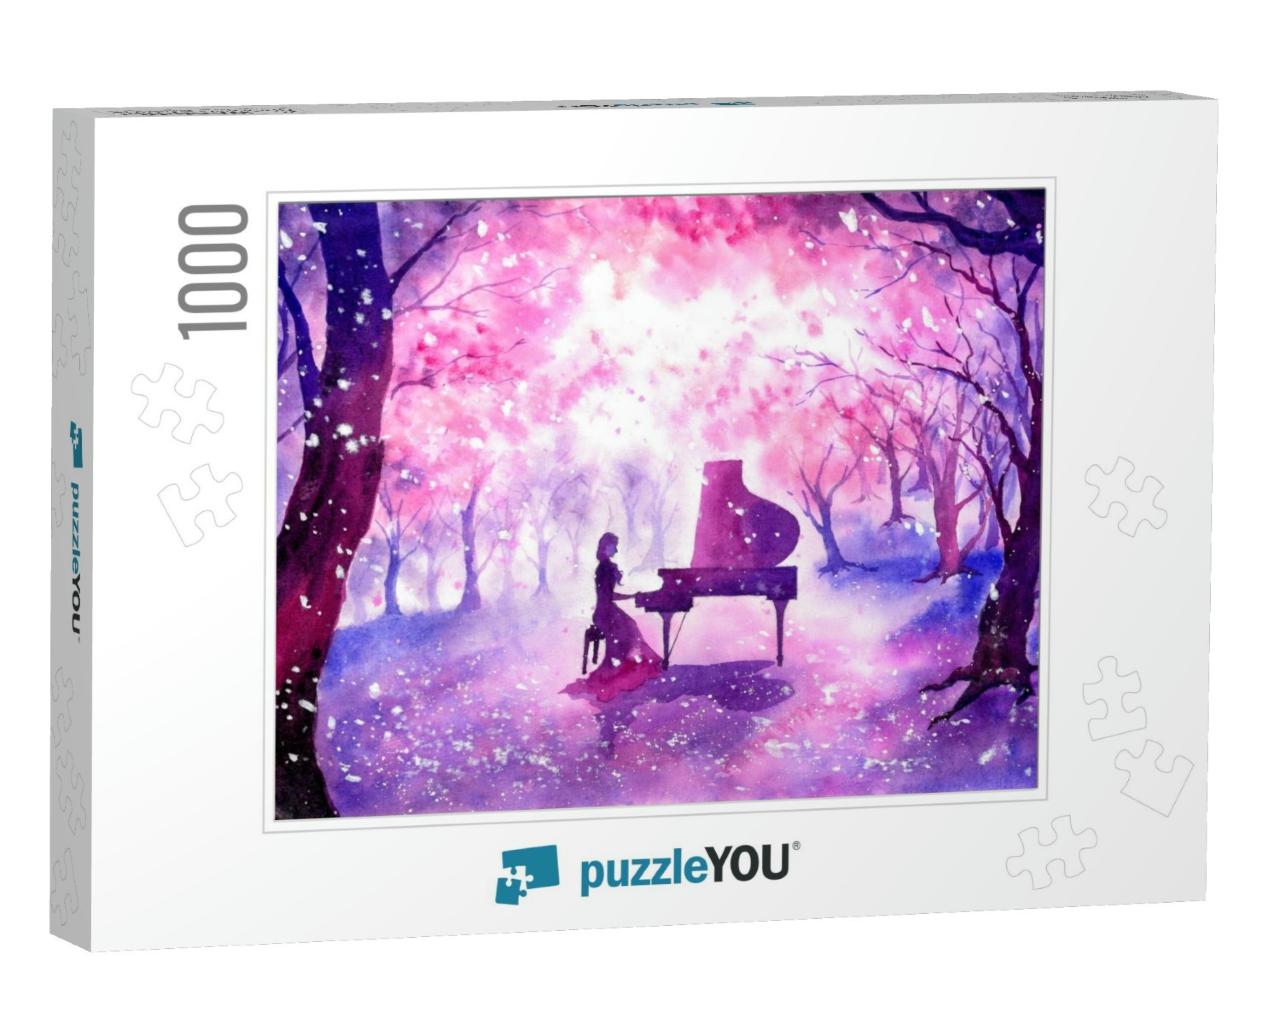 Watercolor Painting - Playing Piano Under Blossom Cherry... Jigsaw Puzzle with 1000 pieces